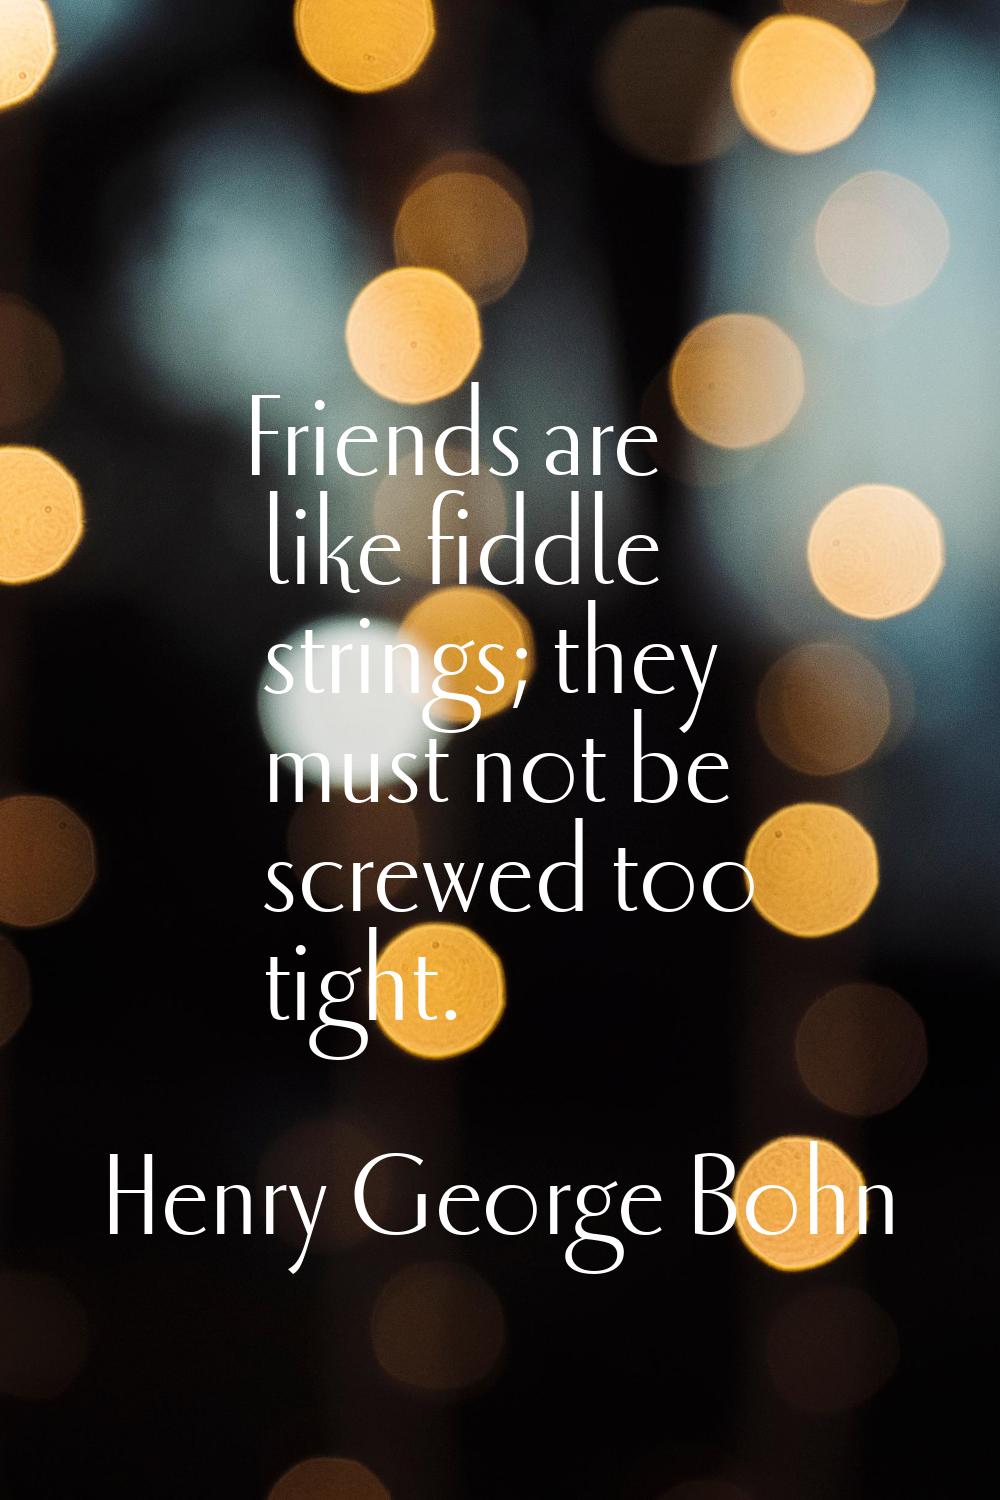 Friends are like fiddle strings; they must not be screwed too tight.